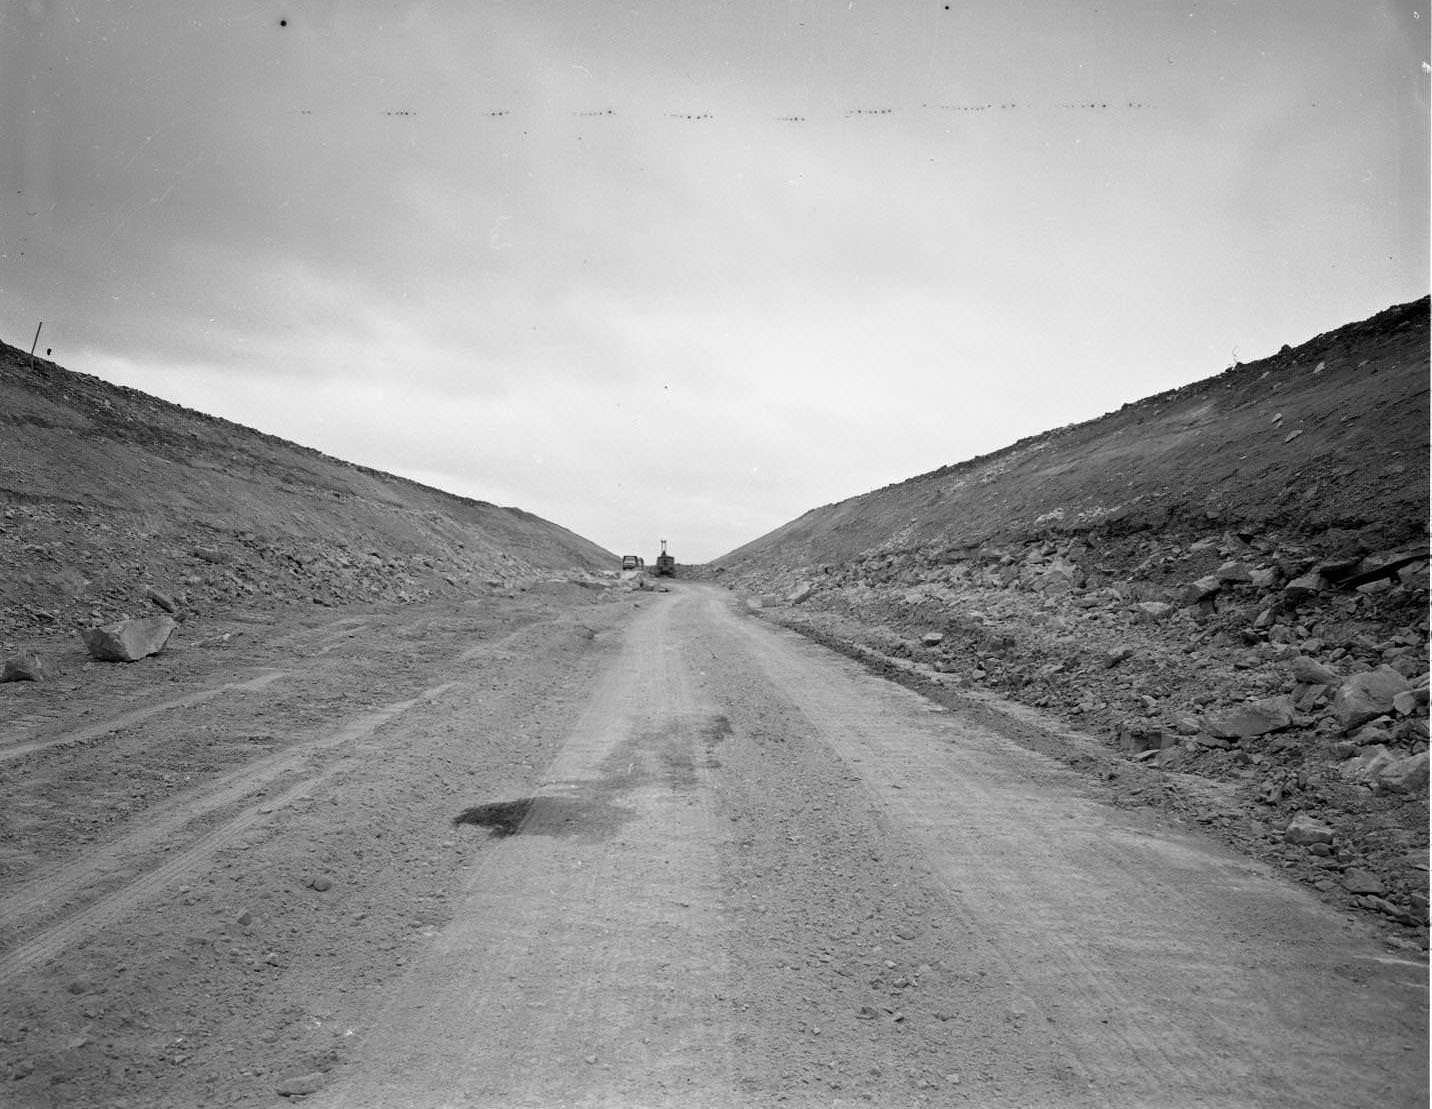 Construction on a water ditch at Lake Ft. Phantom Hill, 1957